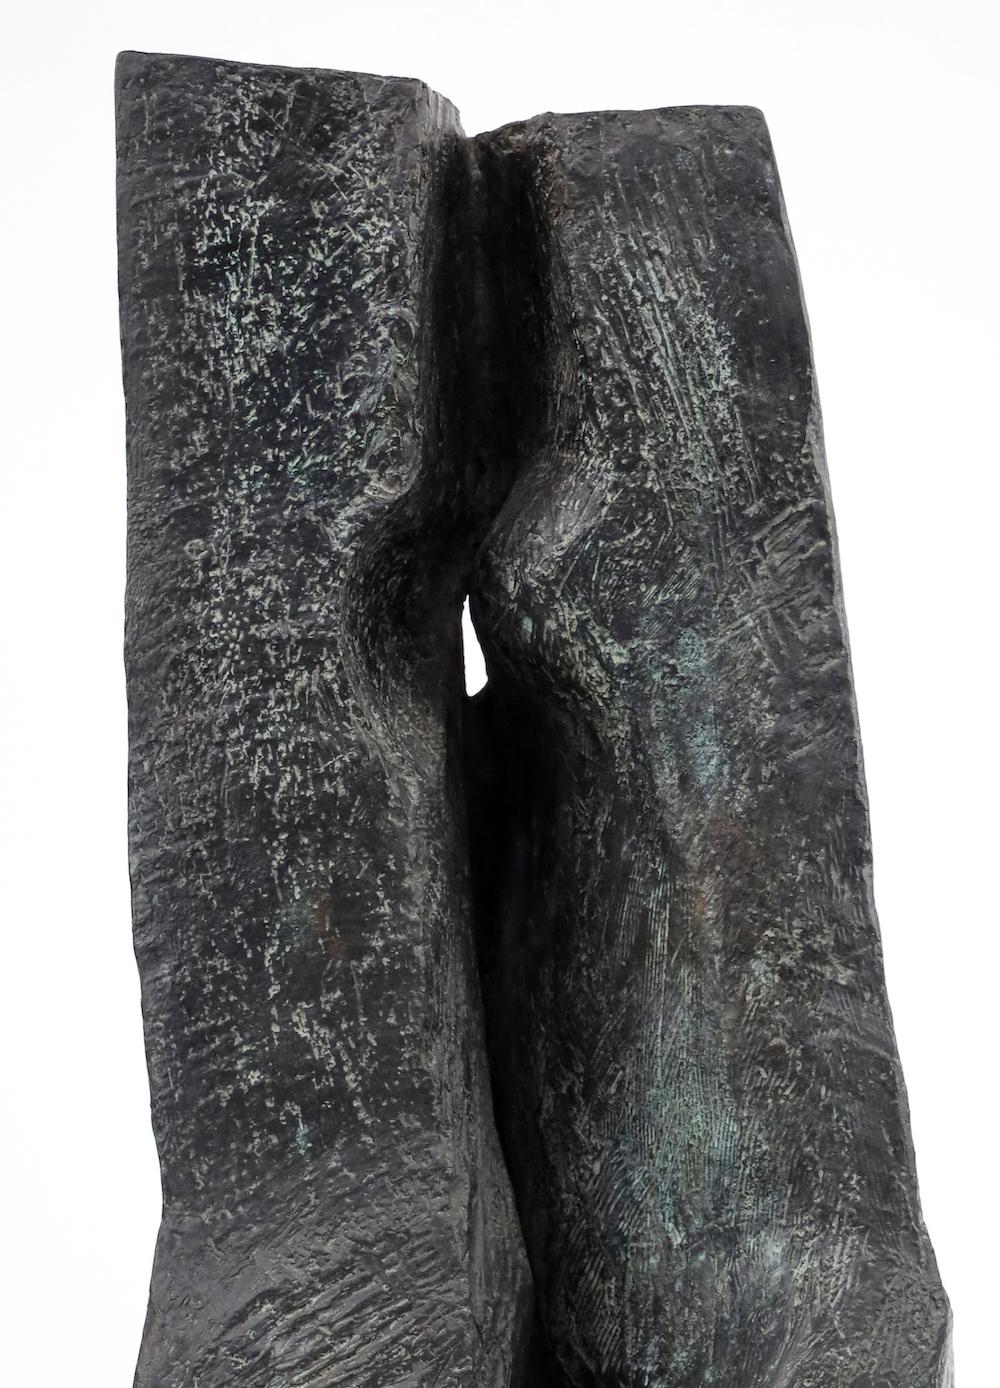 Duo by Martine Demal - Contemporary bronze sculpture, semi abstract For Sale 4